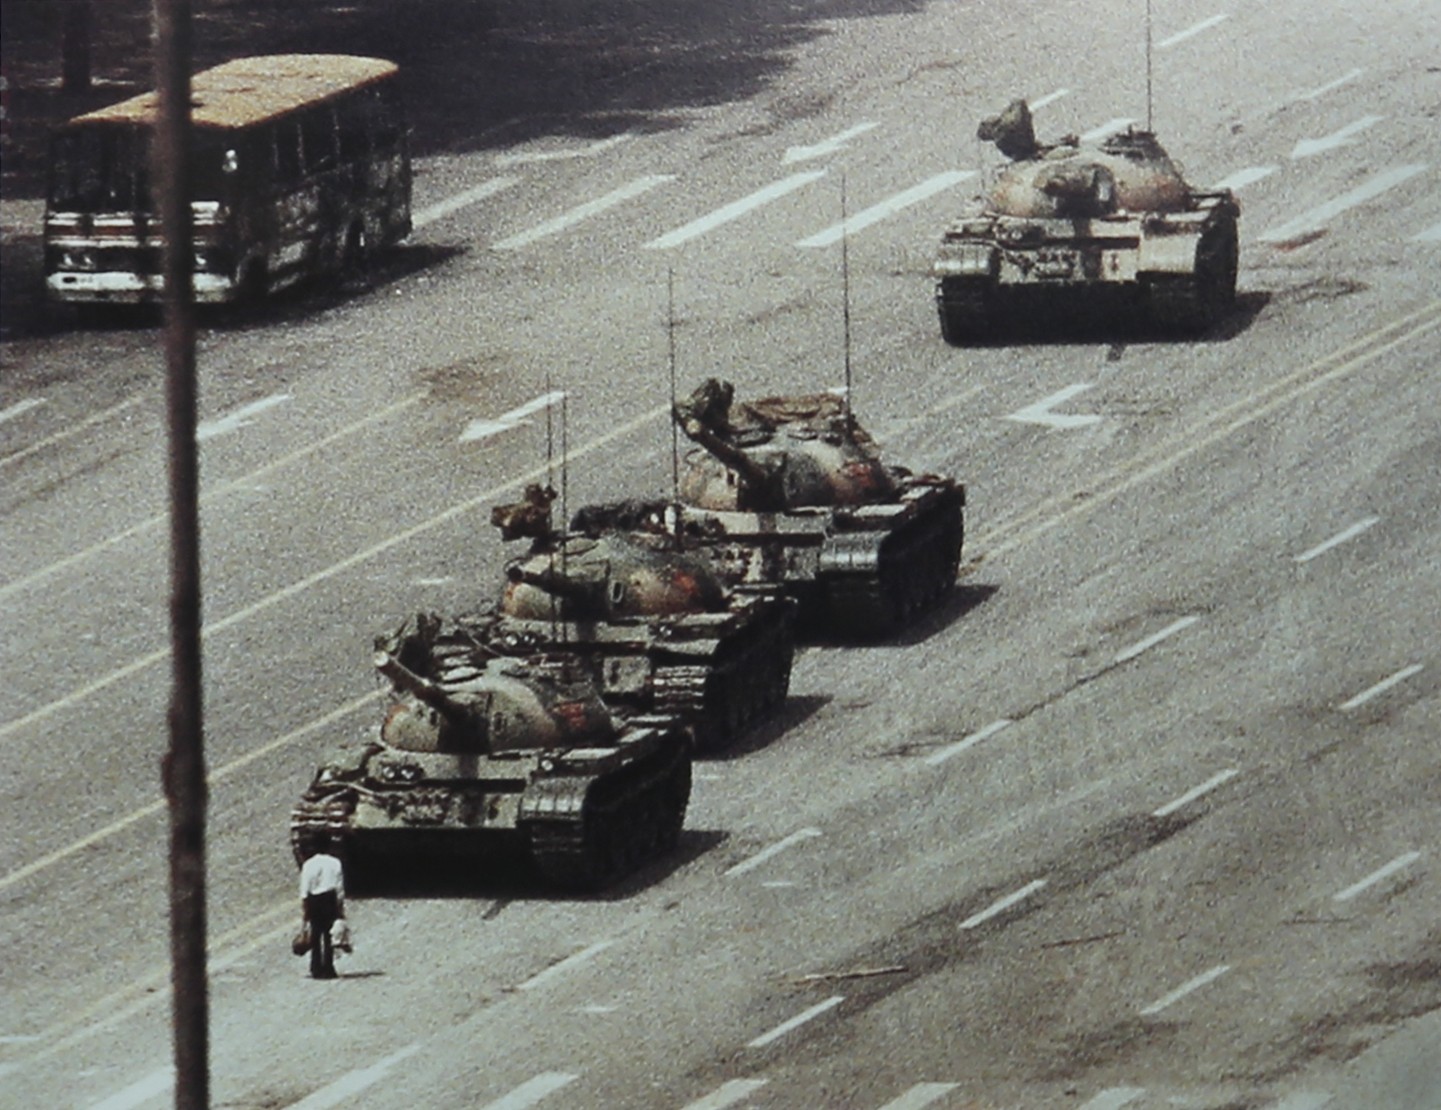 The Tiananmen (photo source: network) The Miho Museum of Art is